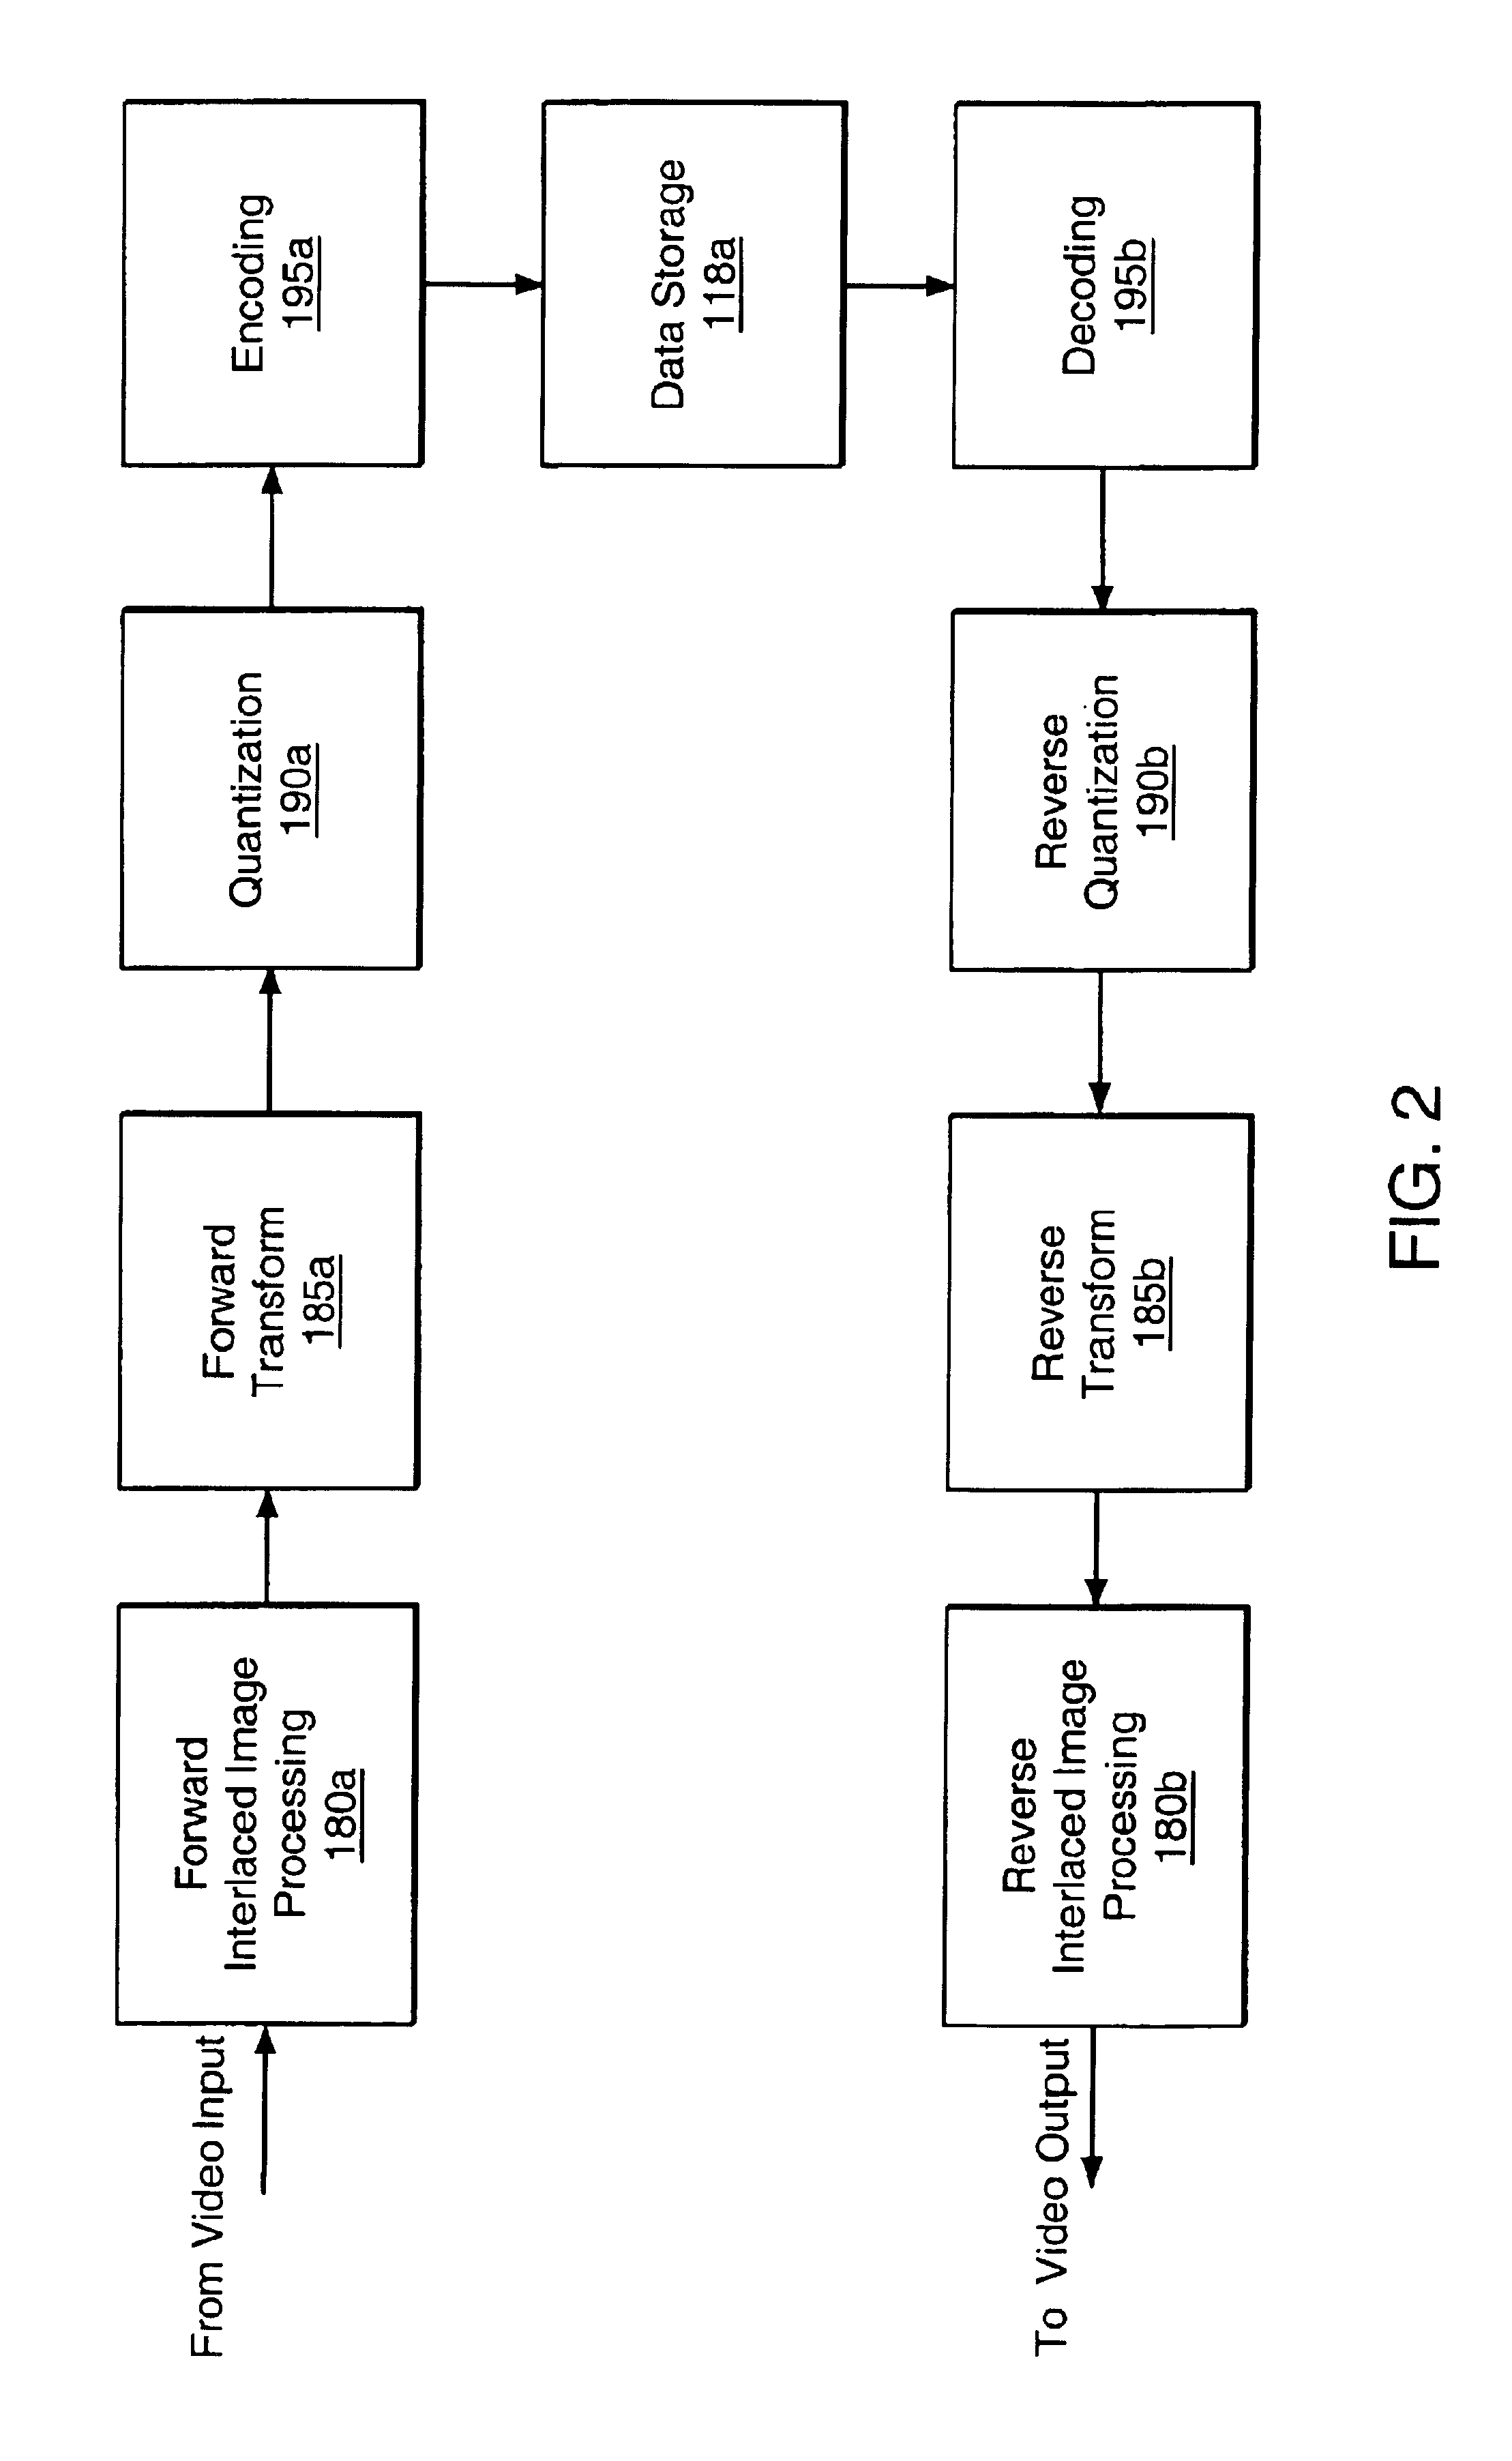 Apparatus and method for improved interlace processing